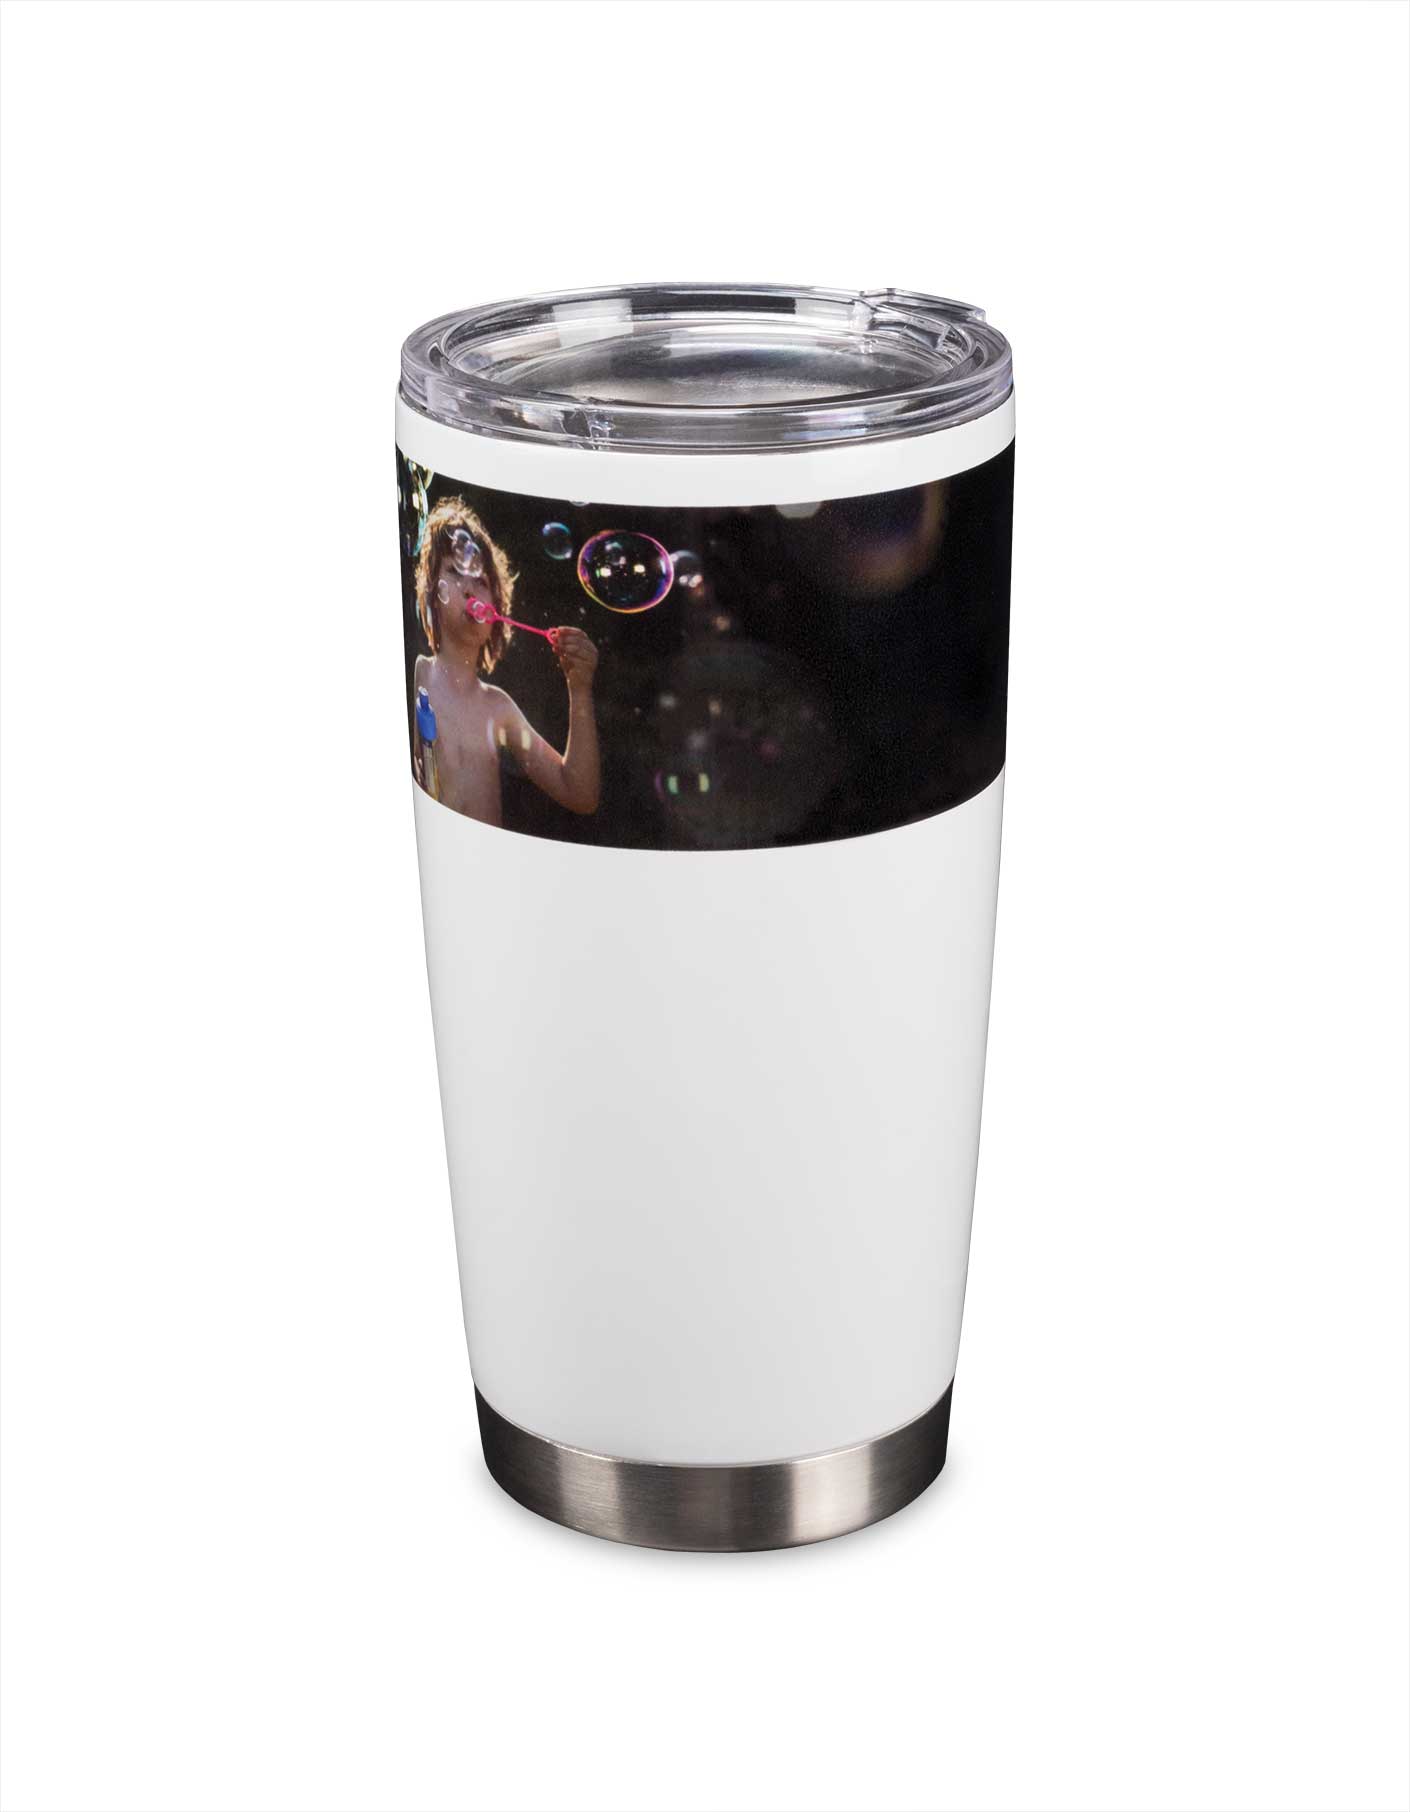 https://www.goodprints.com/wp-content/uploads/2019/07/Personalized-Photo-Double-Wall-Tumbler.jpg